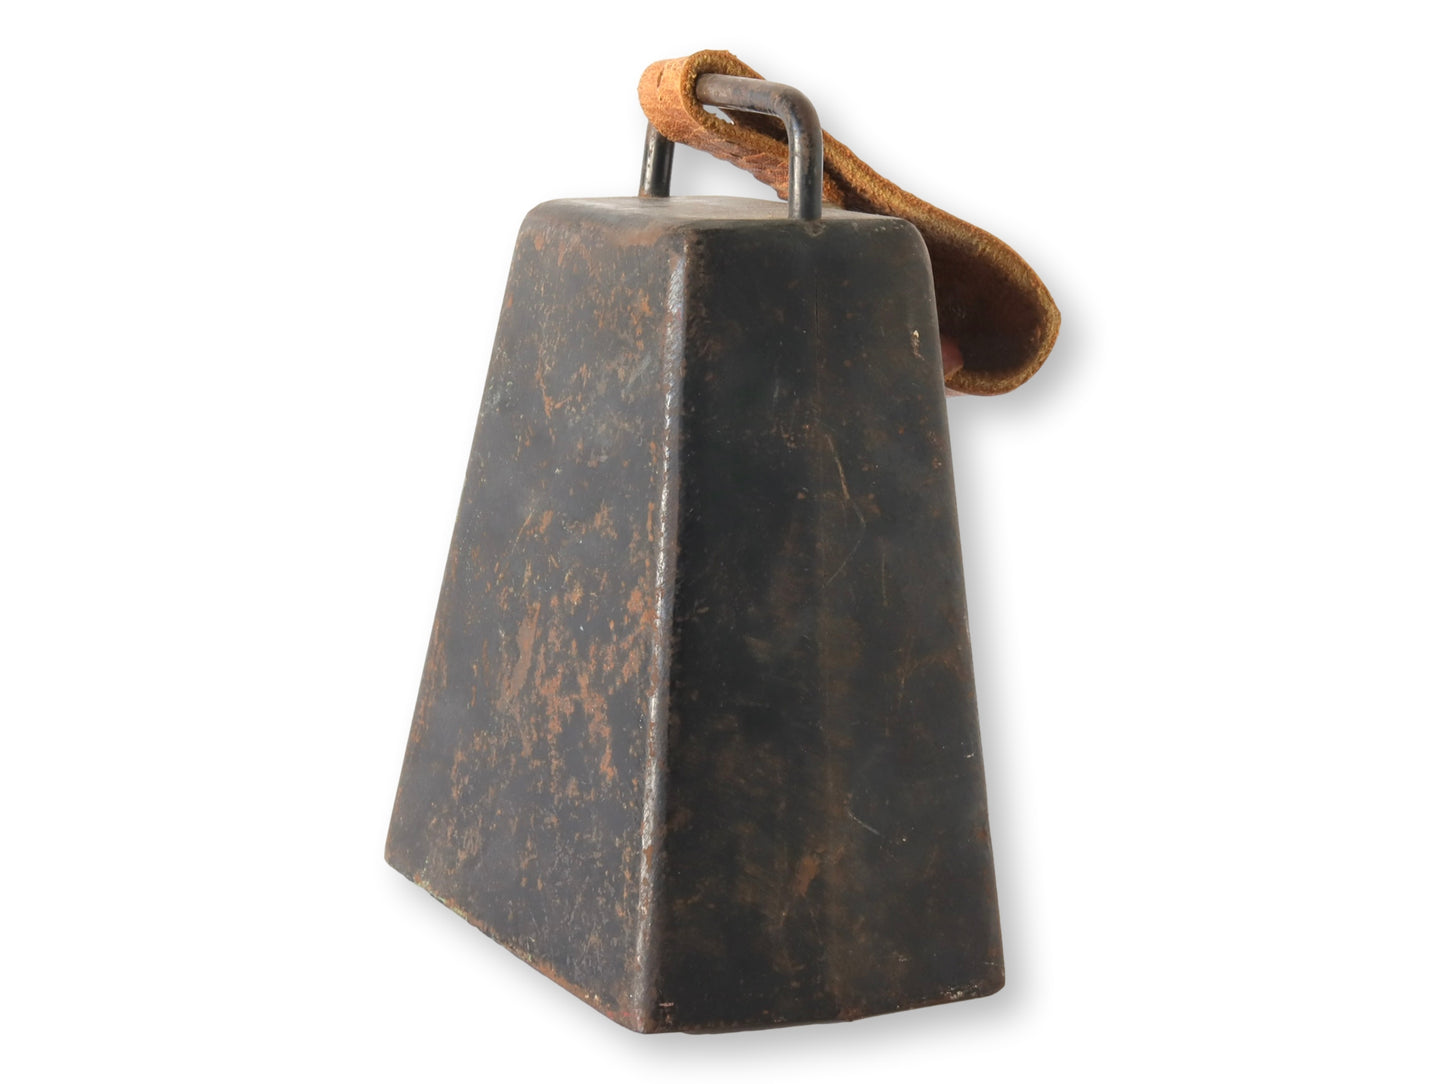 Antique French Cow Bell w/Leather Strap